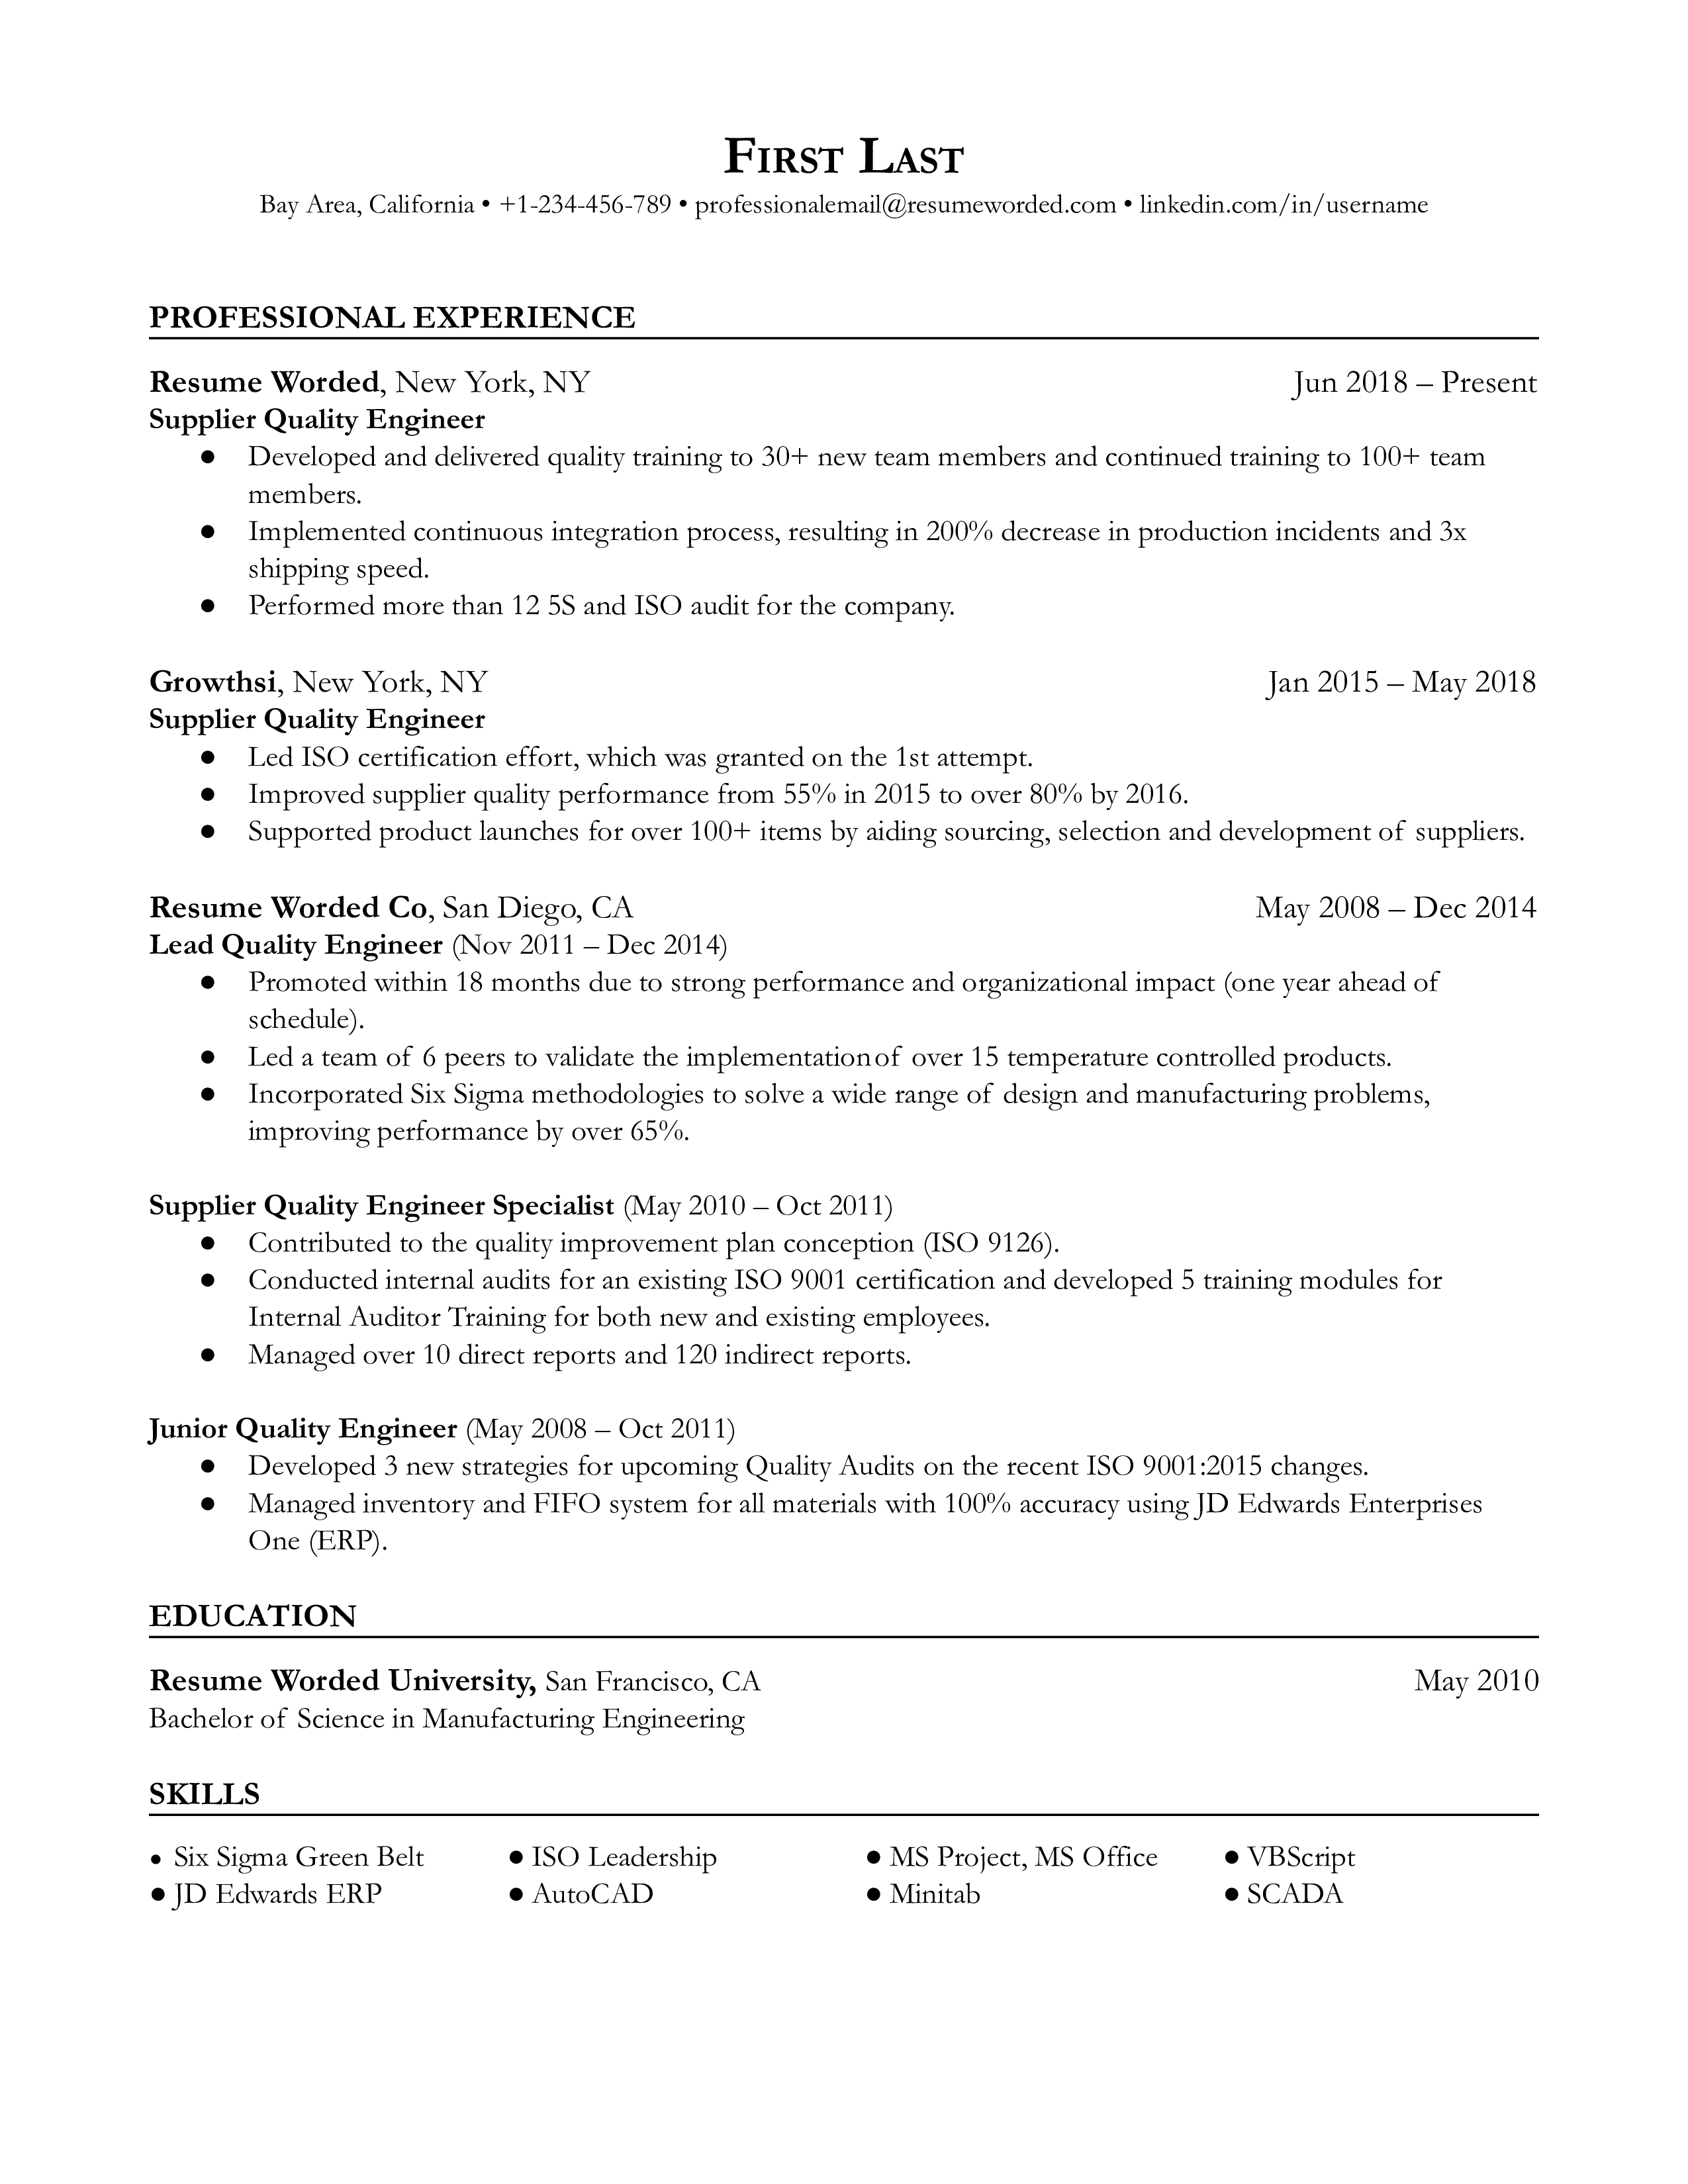 Supplier Quality Engineer resume example in 2023 and tips and trends for job hunters